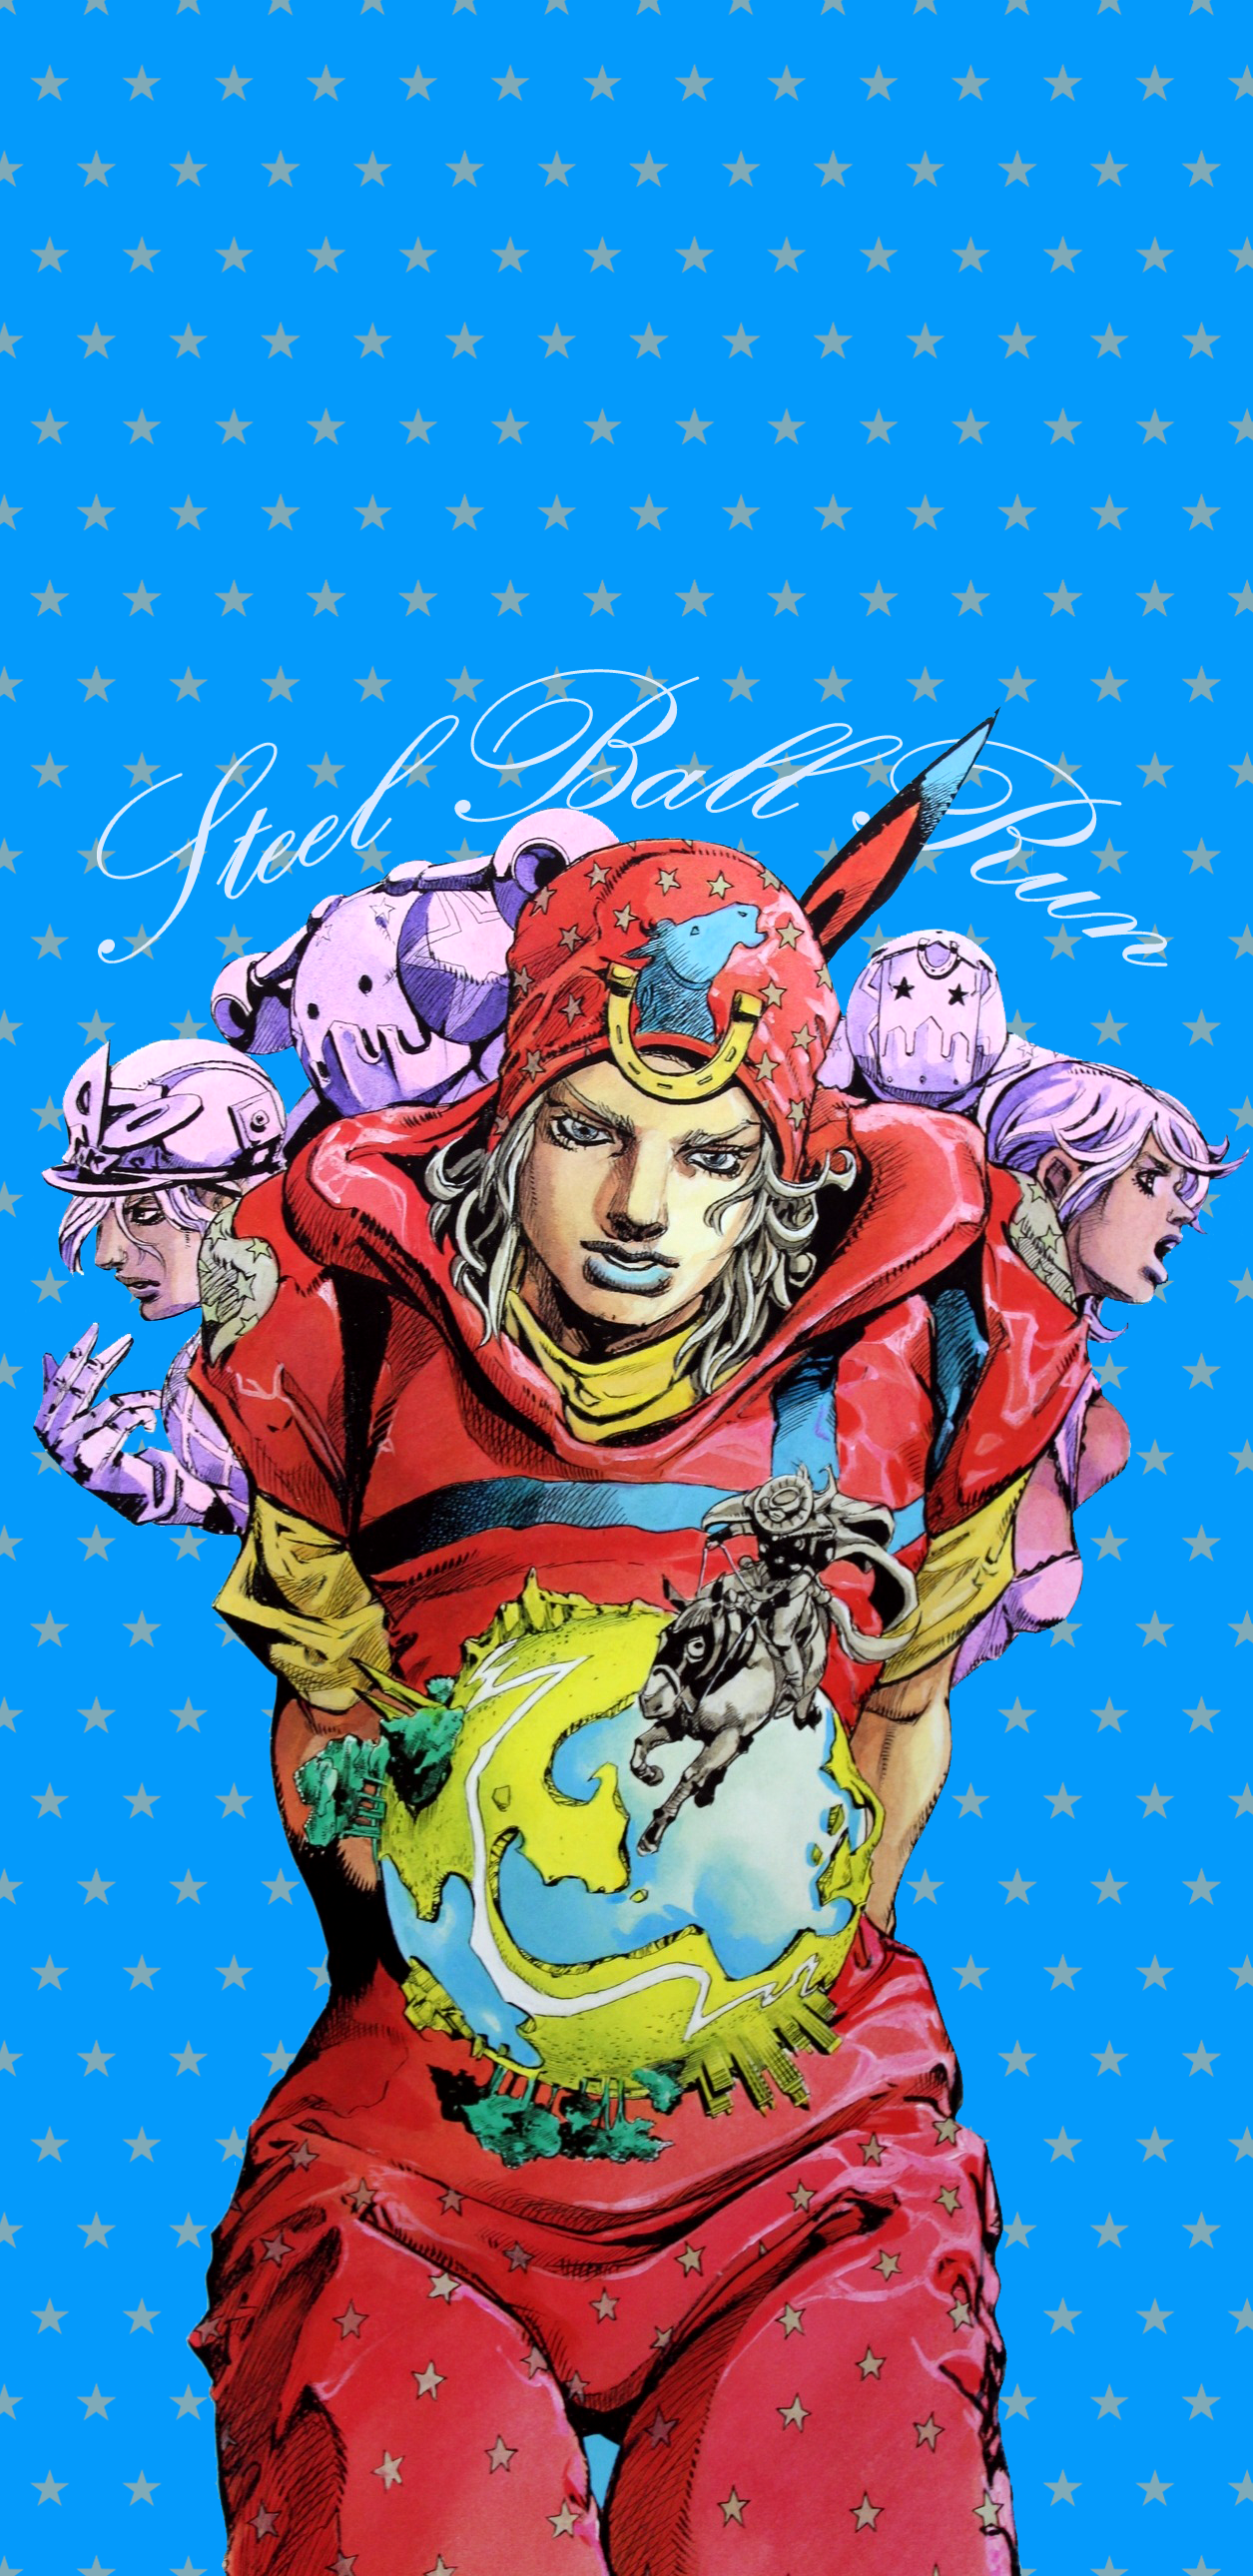 Posting a wallpaper a day until stone ocean is animated day 170: Steel Ball Run